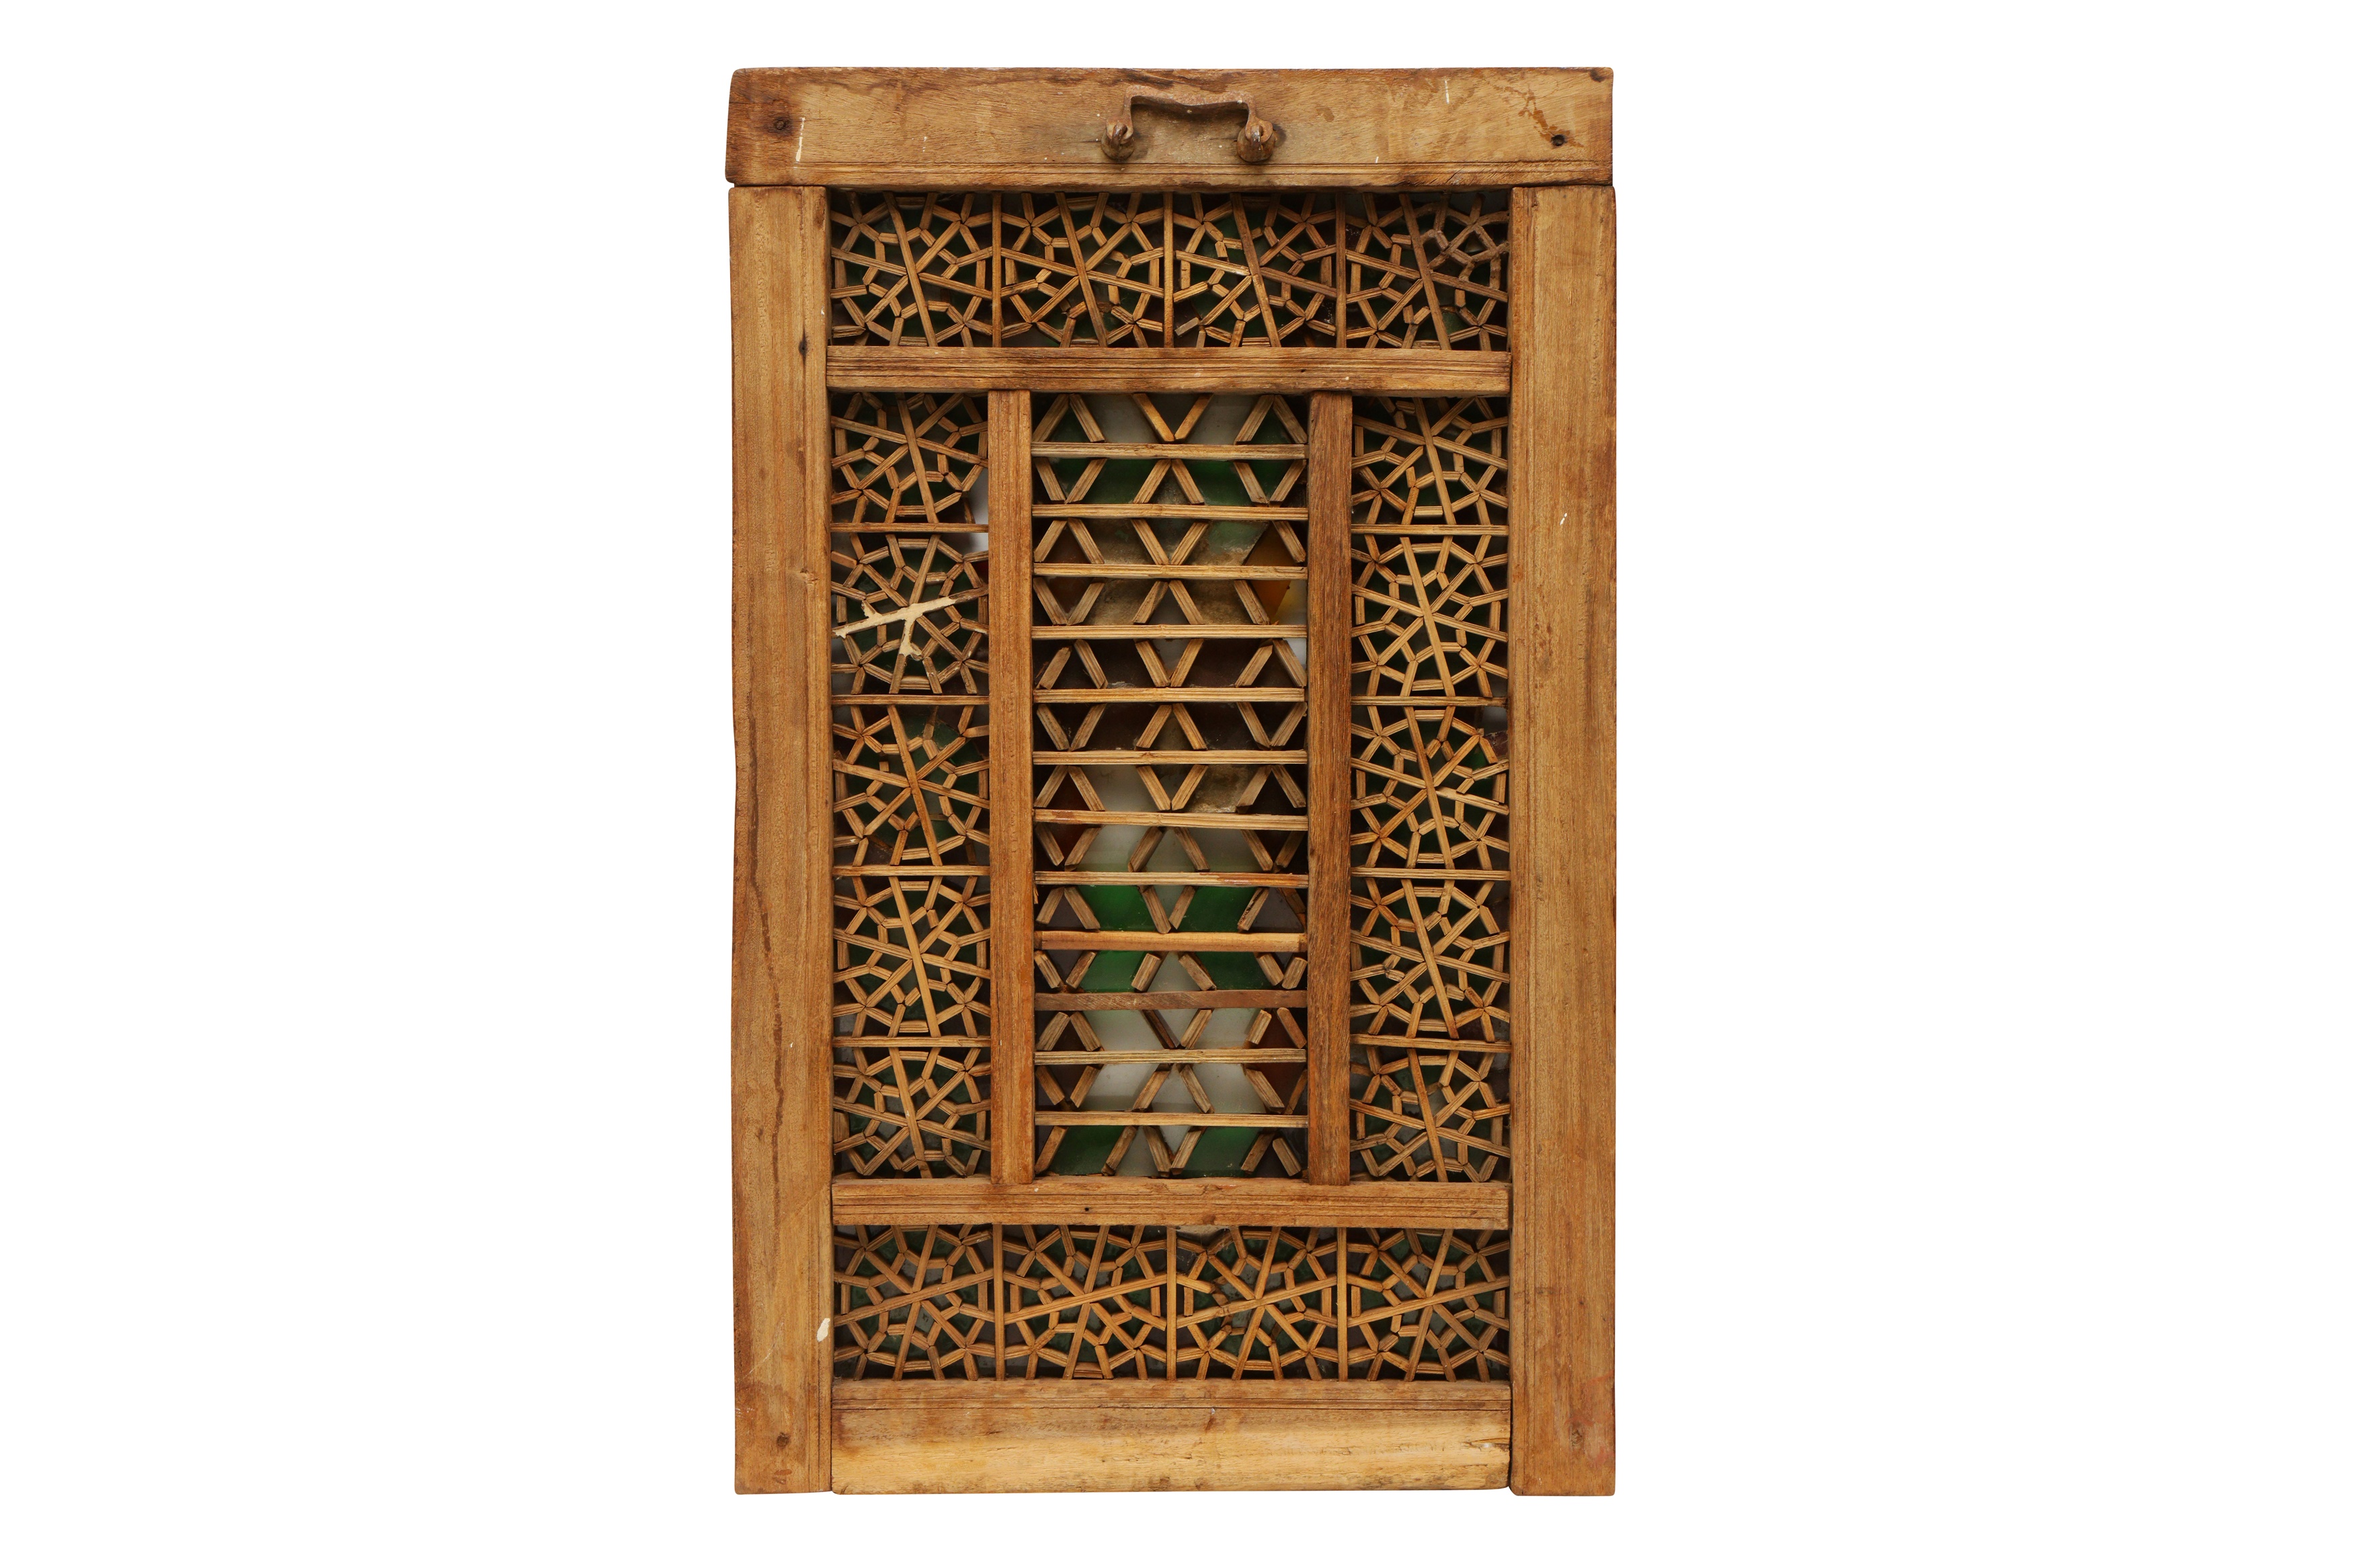 A 19TH CENTURY PERSIAN WINDOW FRAME - Image 2 of 2